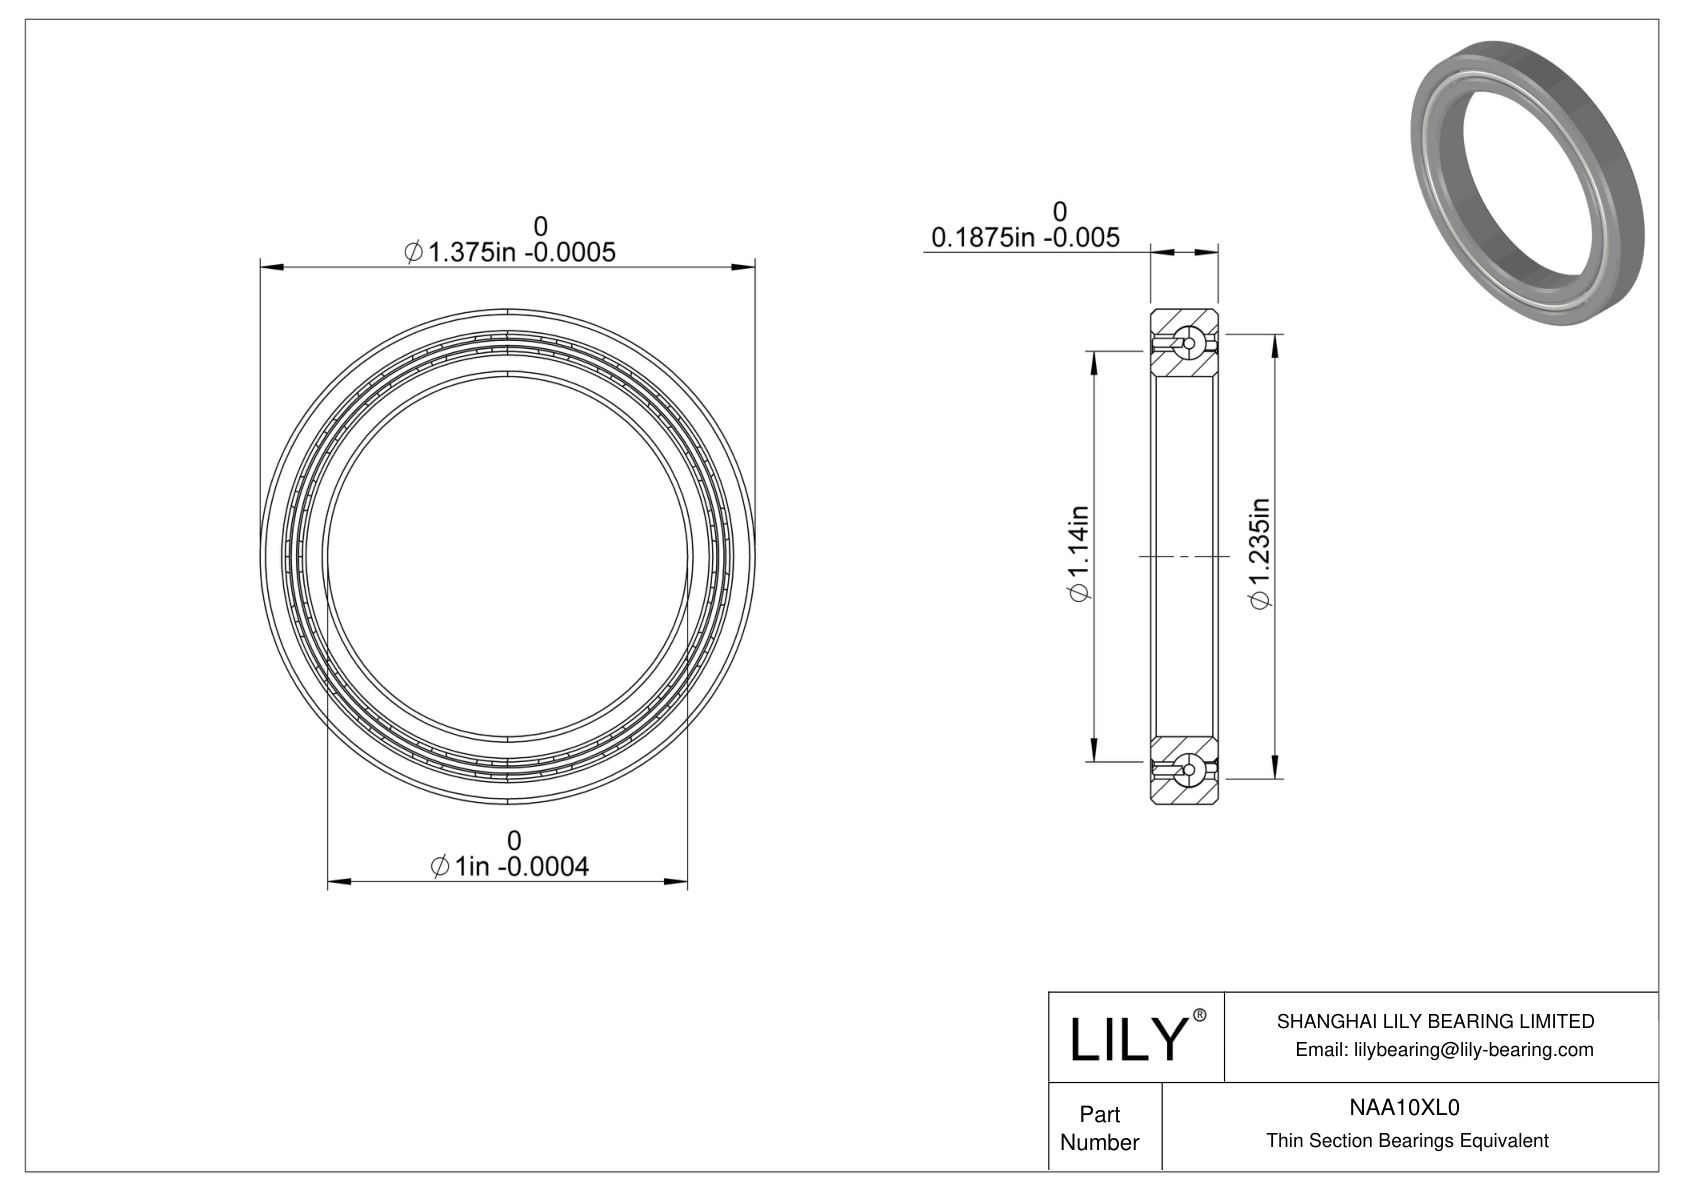 NAA10XL0 Constant Section (CS) Bearings cad drawing